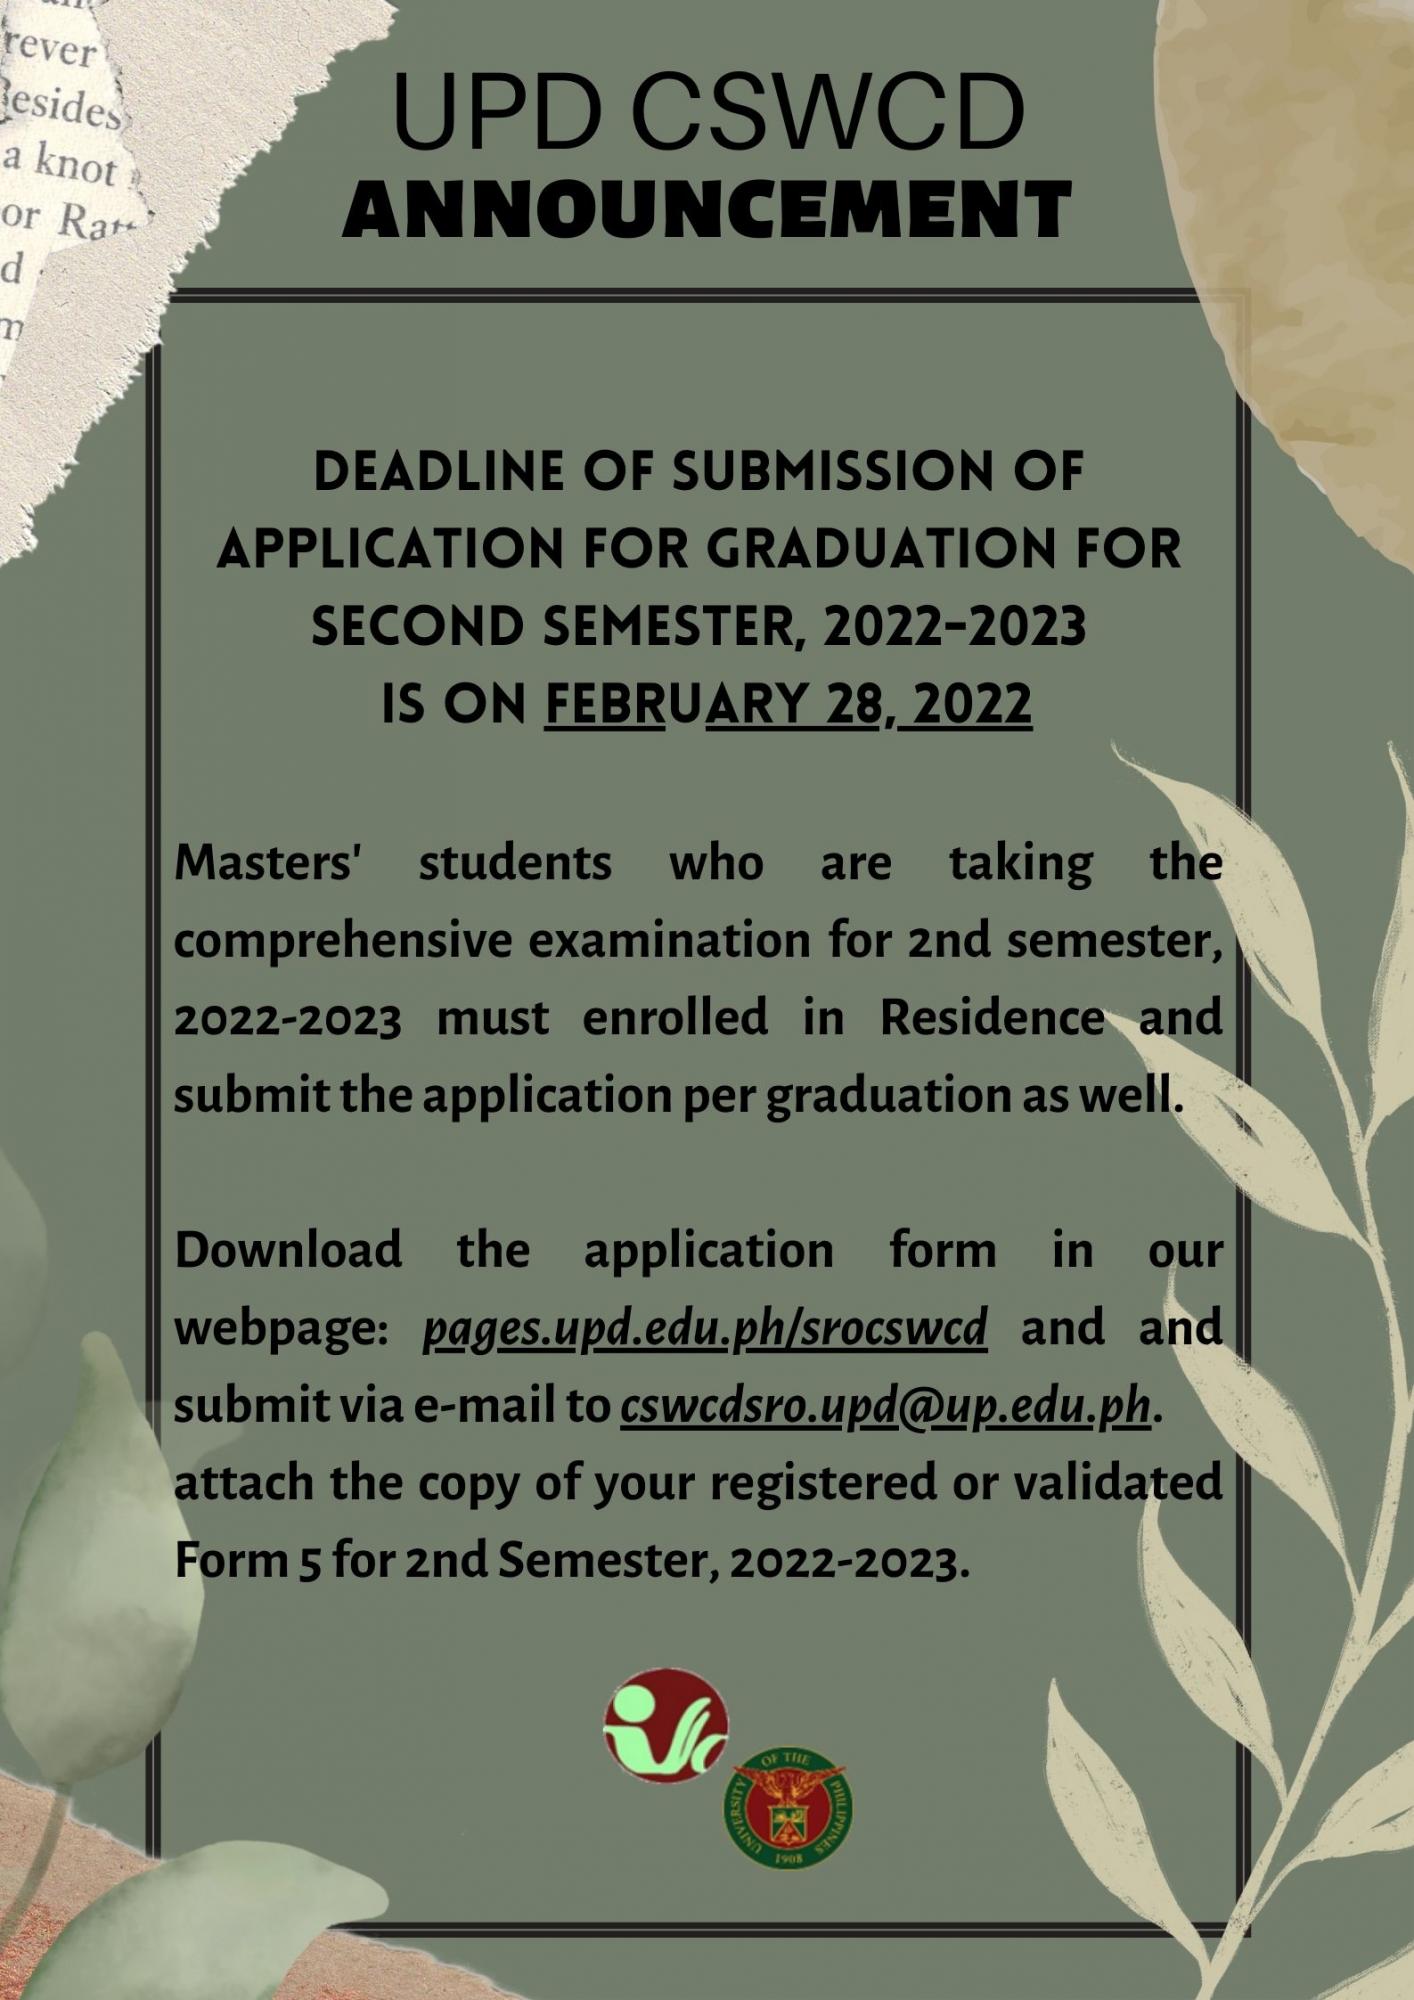 deadline_of_submission_of_application_for_graduation_for_second_semester_2022-23.jpg